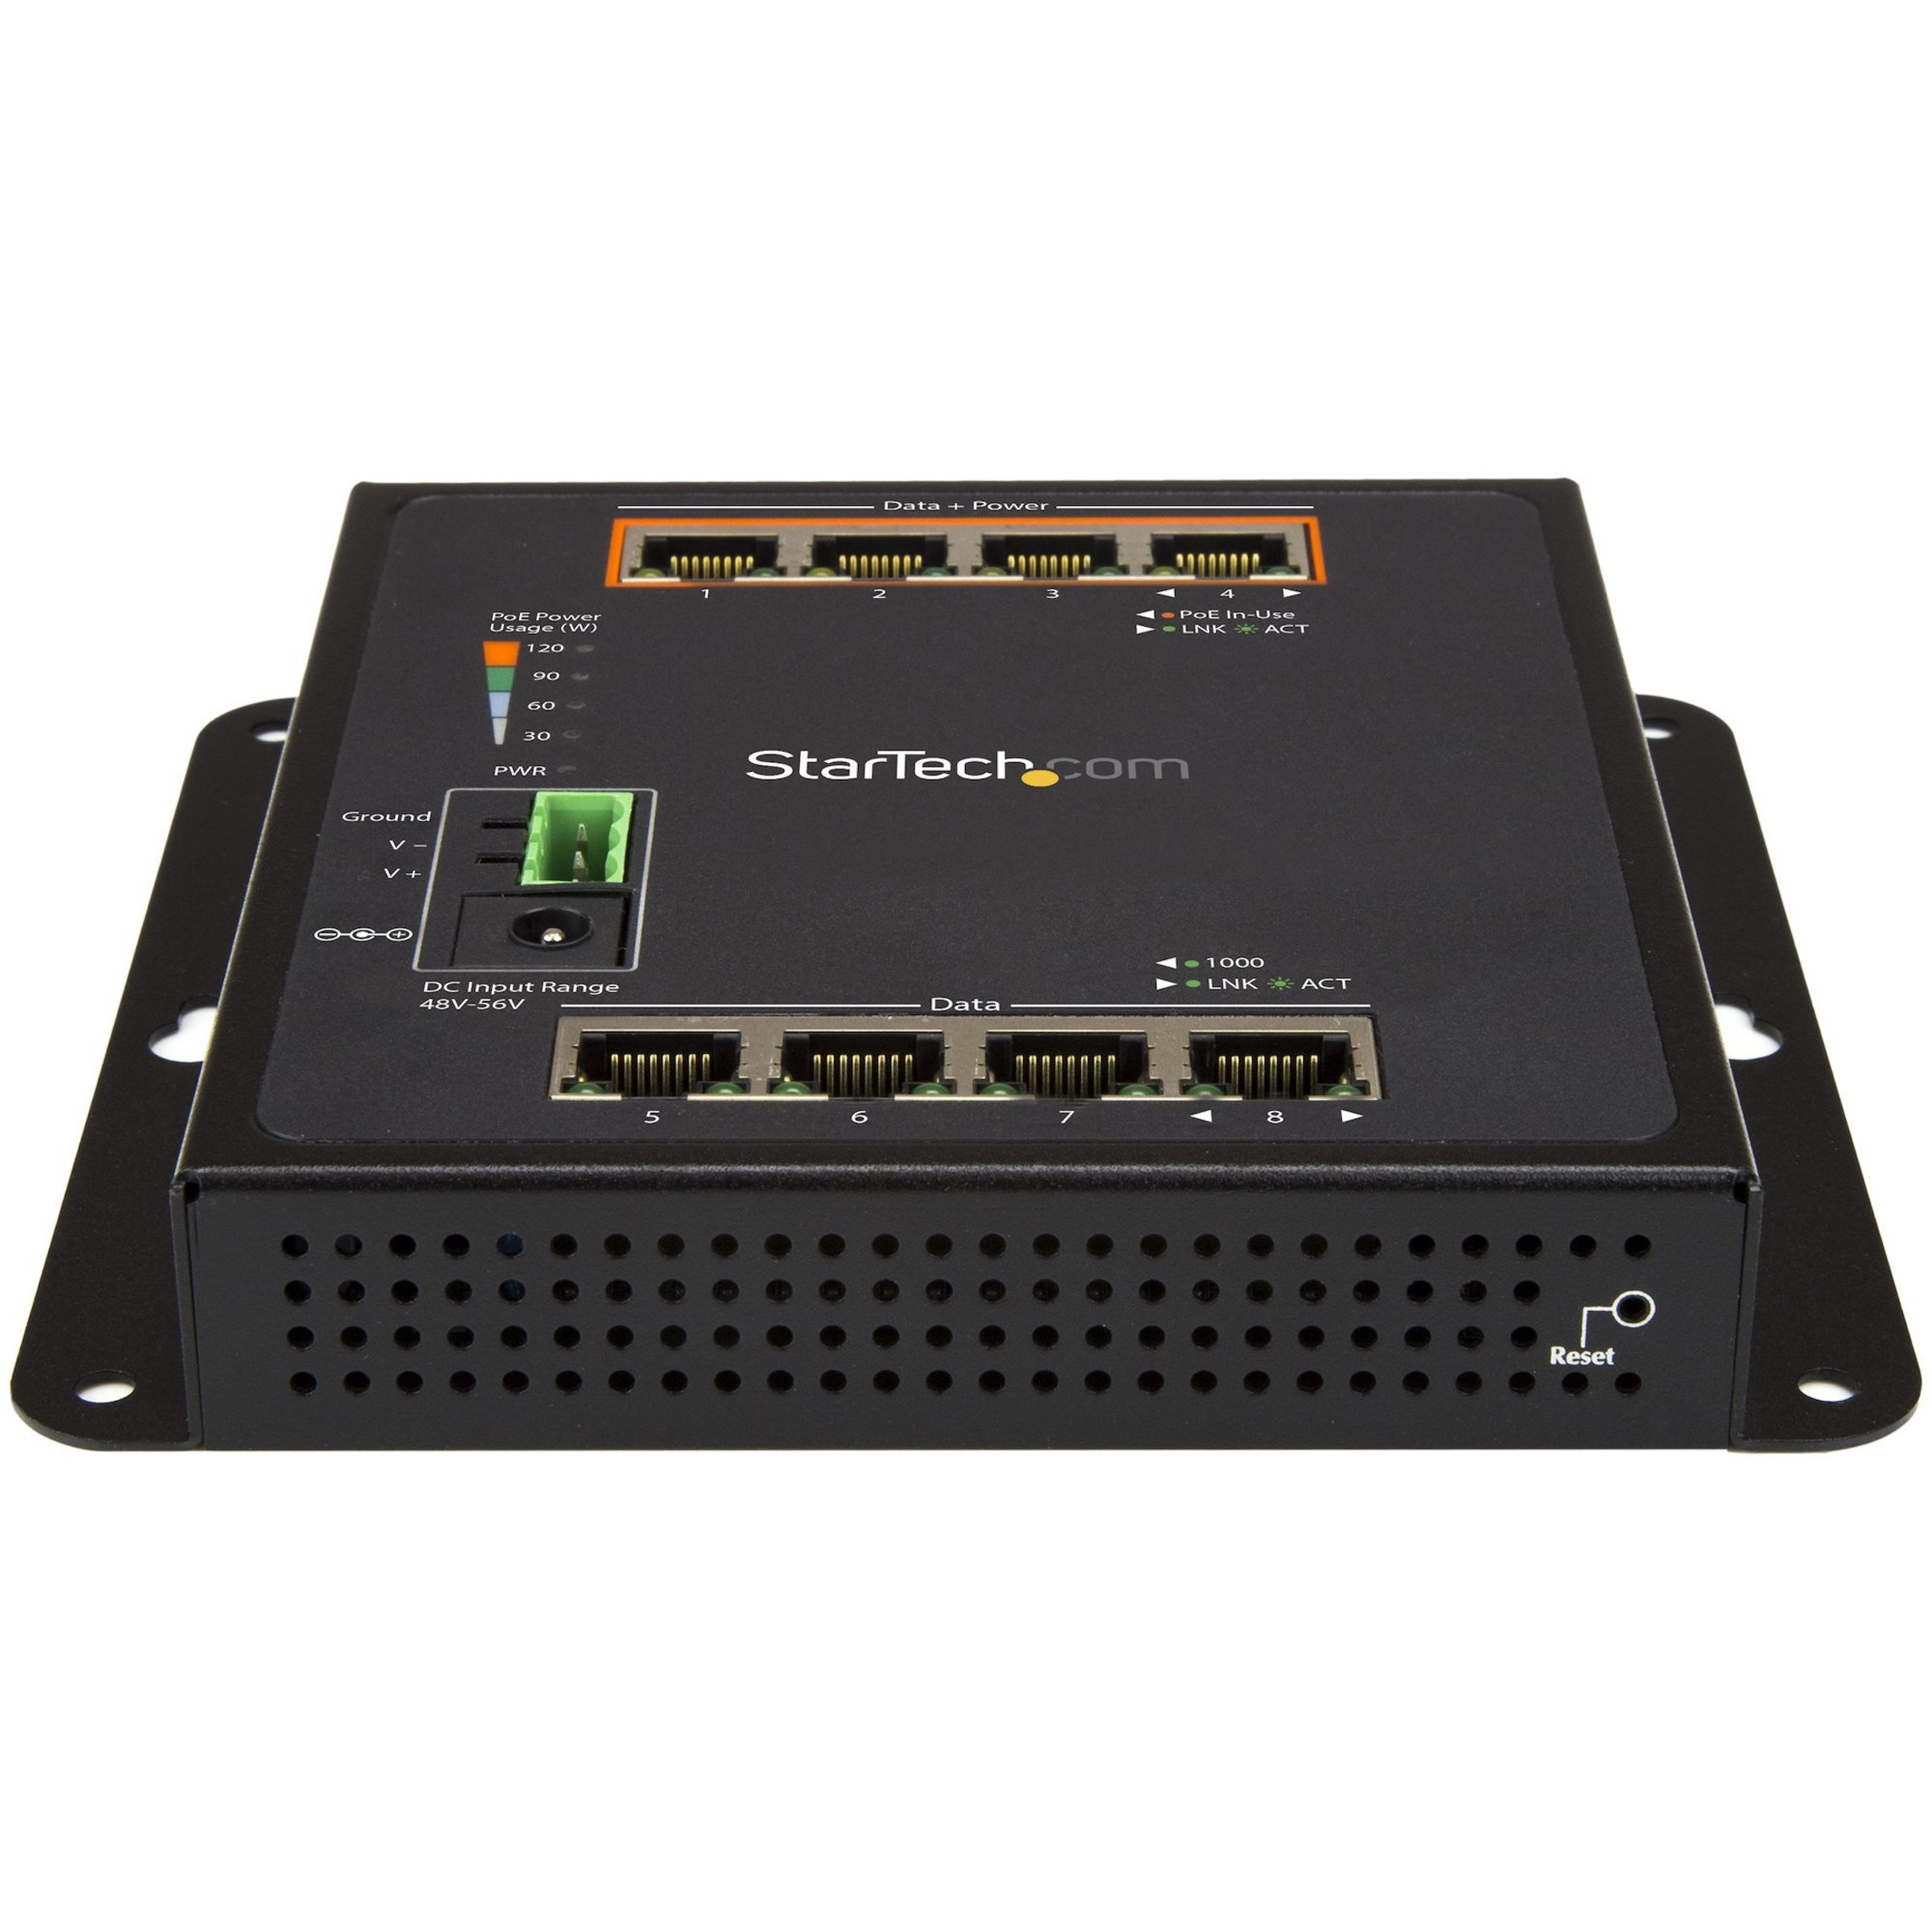 Startech .com Industrial 8 Port Gigabit PoE Switch4 x PoE+ 30WPower Over Ethernet GbE Layer/L2 Managed Network Switch -40C to +75CInd… IES81GPOEW